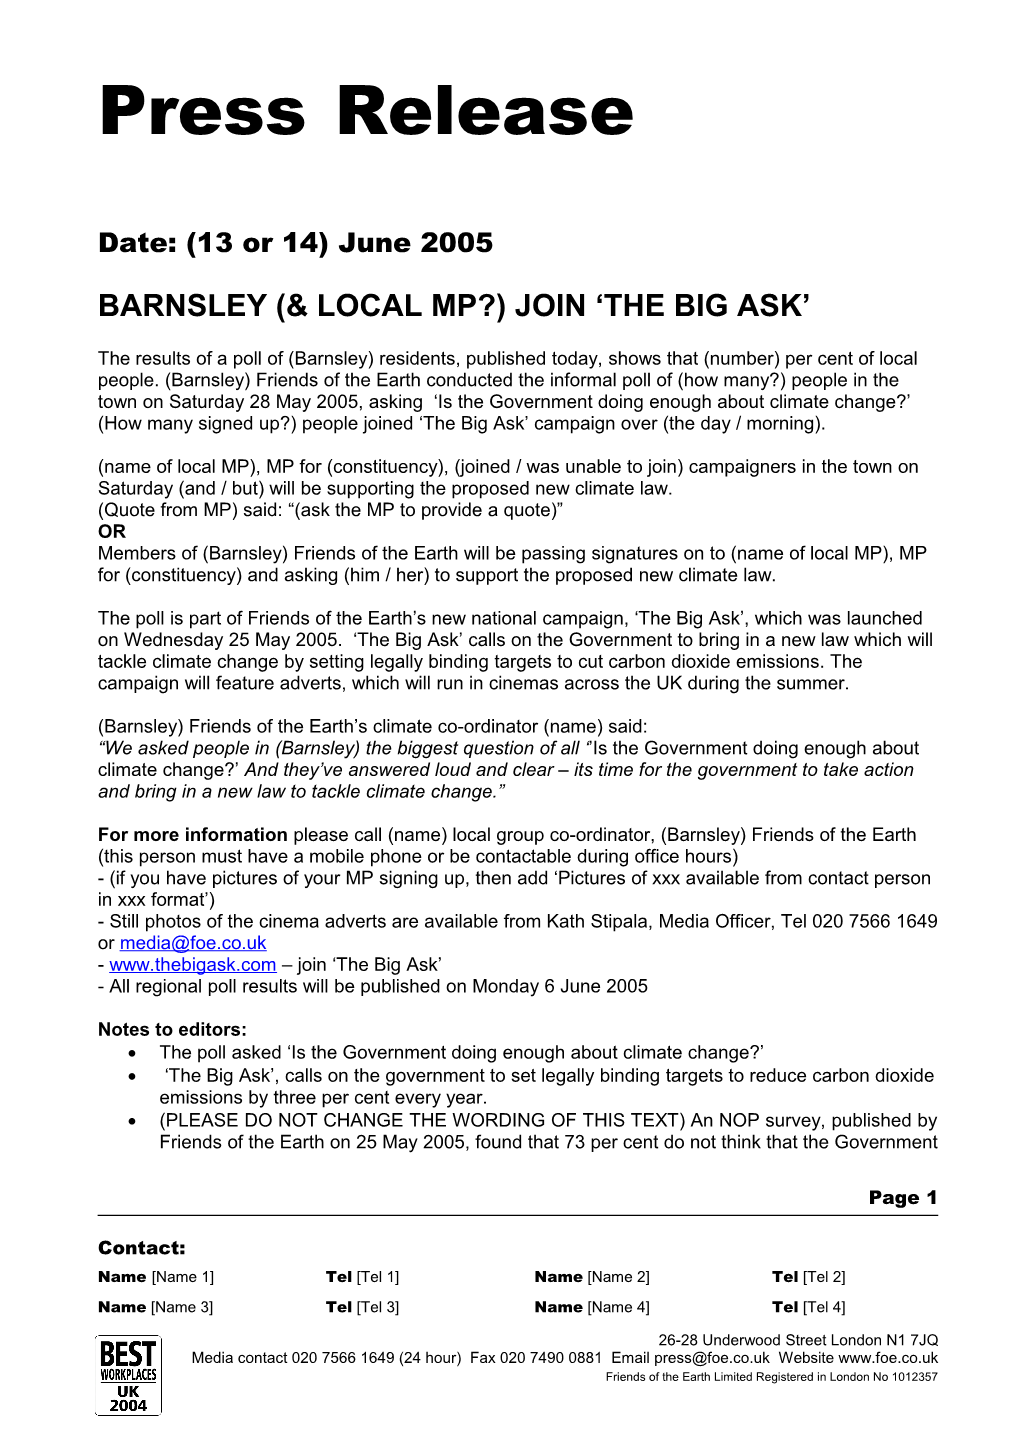 Post-Event Press Release for Big Ask Day of Action